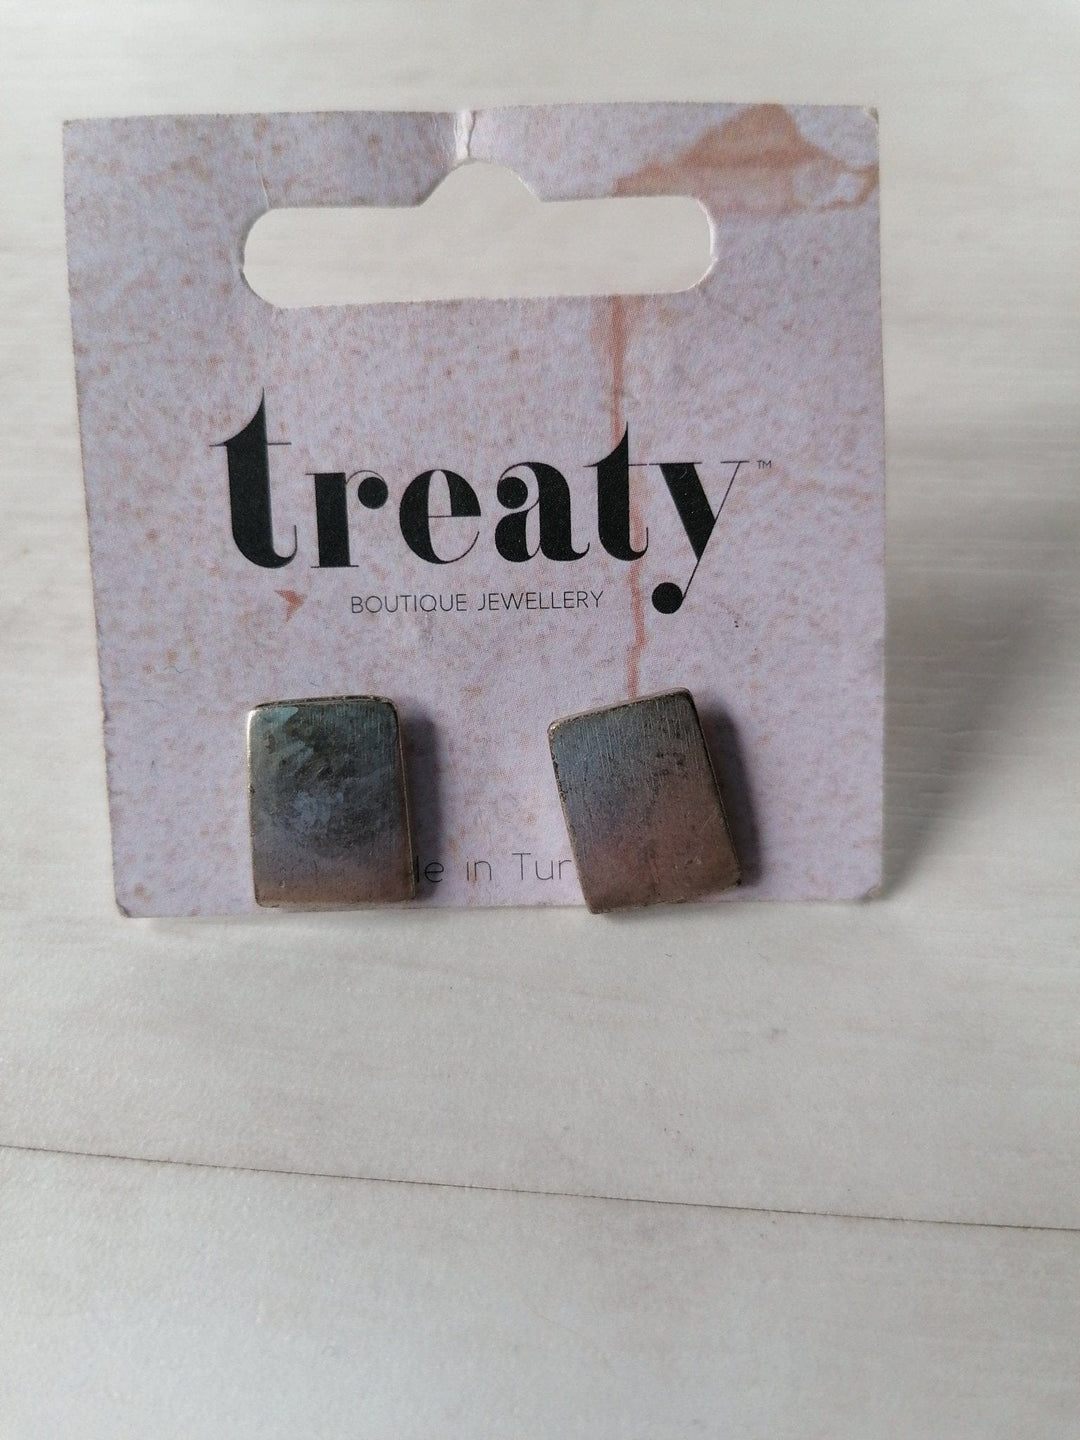 treaty louice earrings £12.99 now £8 - Crabtree Cottage